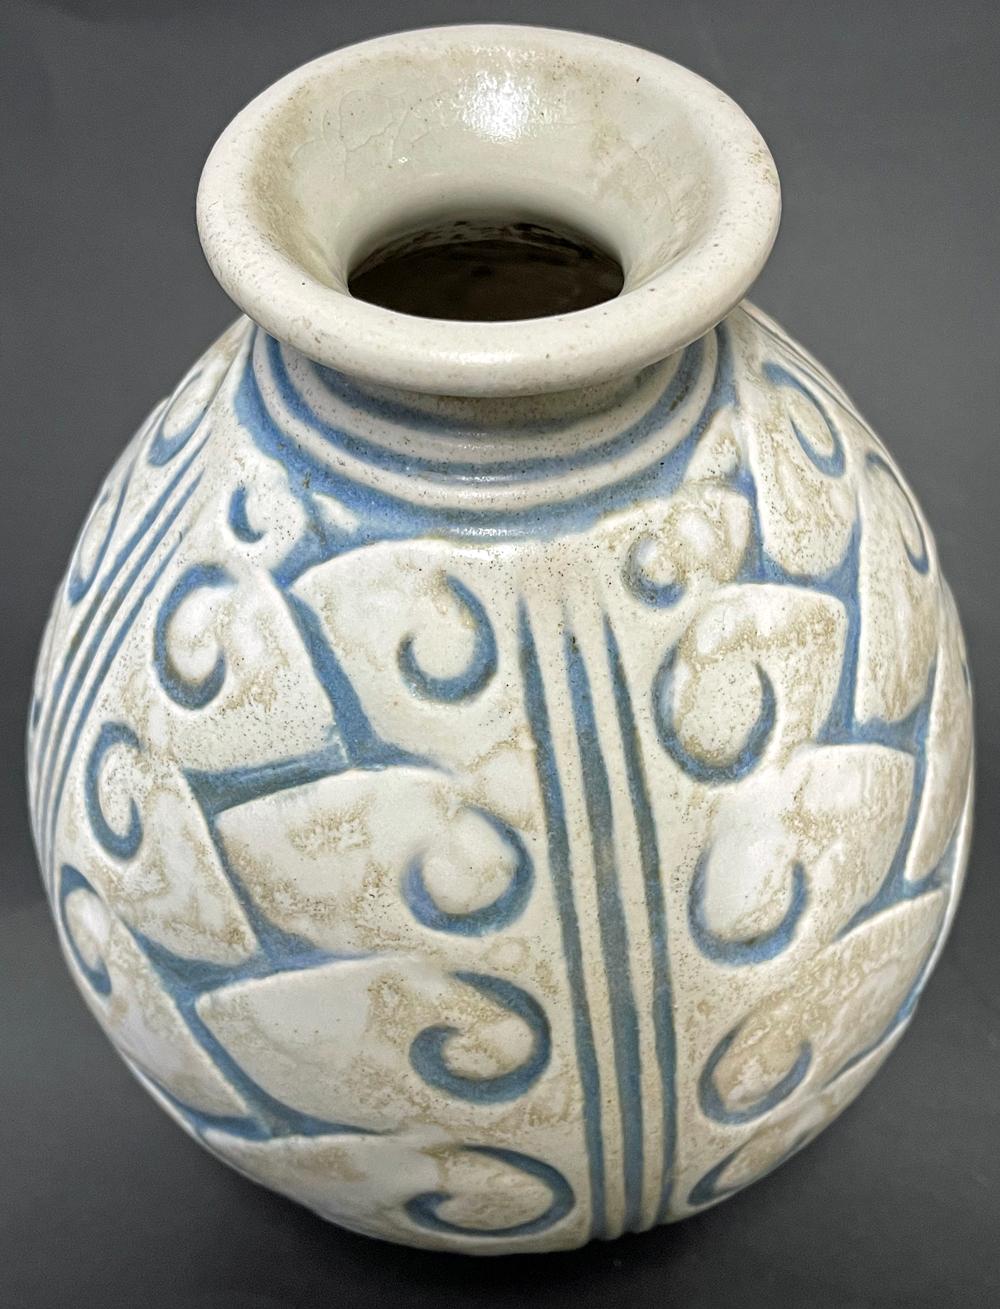 French Art Deco Vase with Stylized Foliate Forms, Blue and Gray, by Mougin